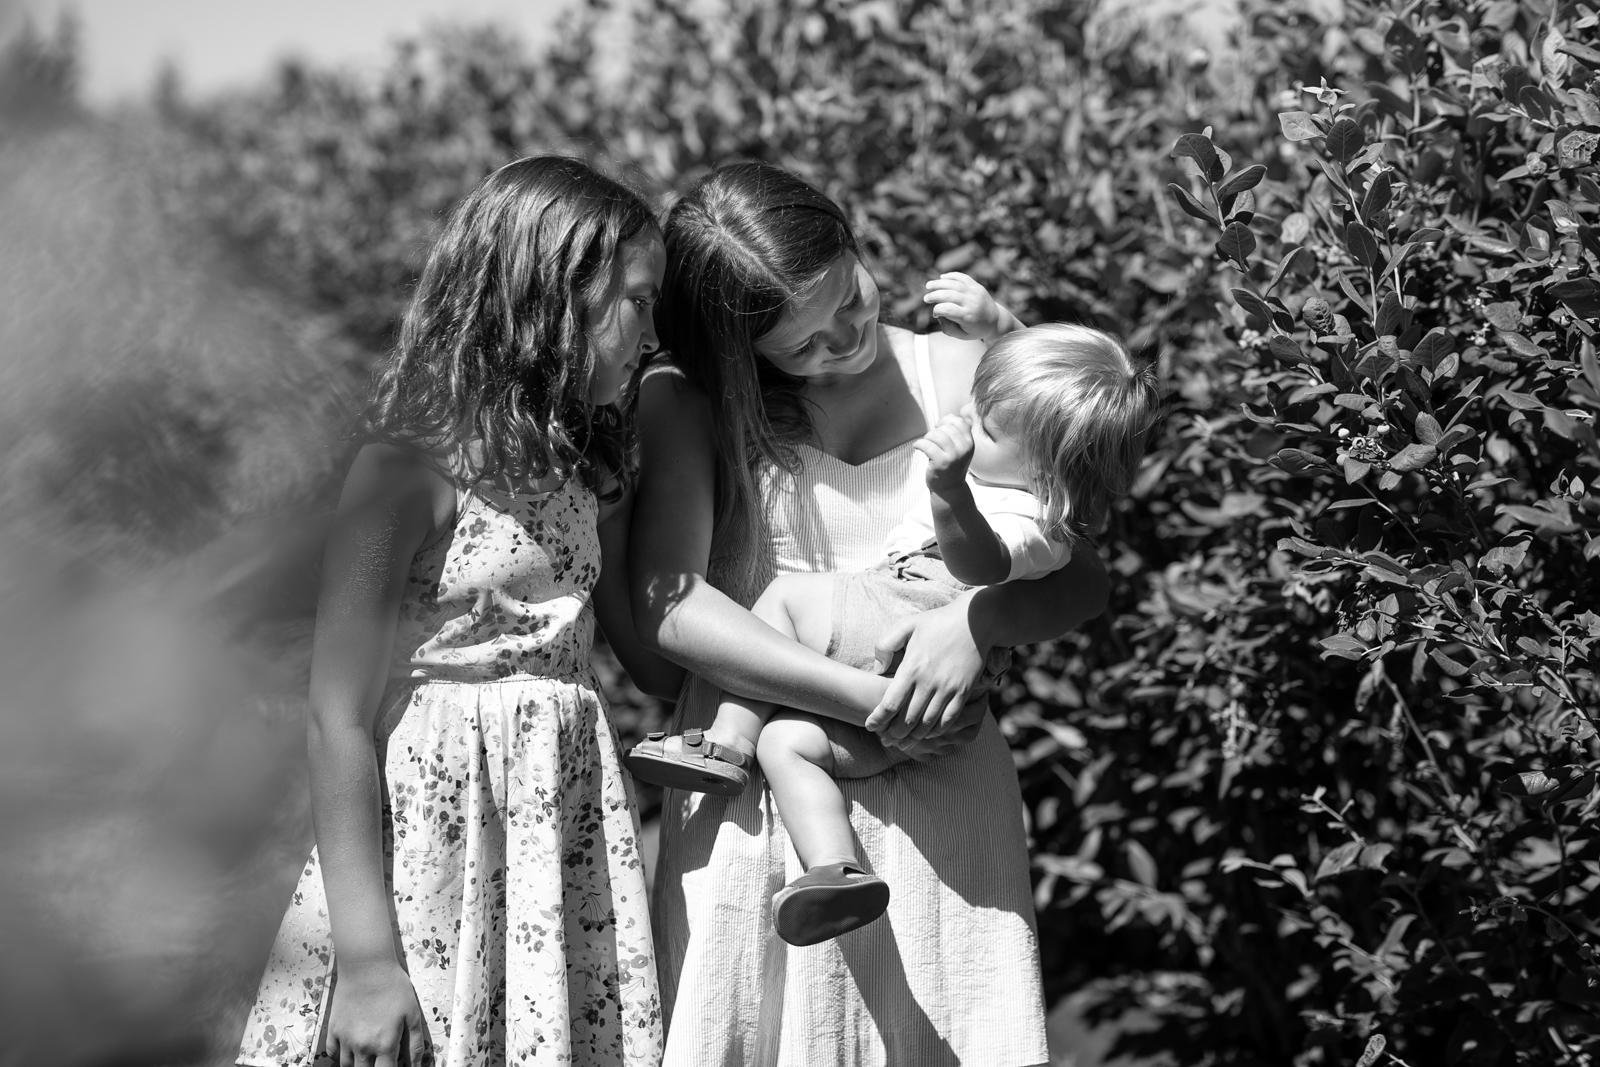 maple valley summer mini sessions - seattle lifestyle photographer